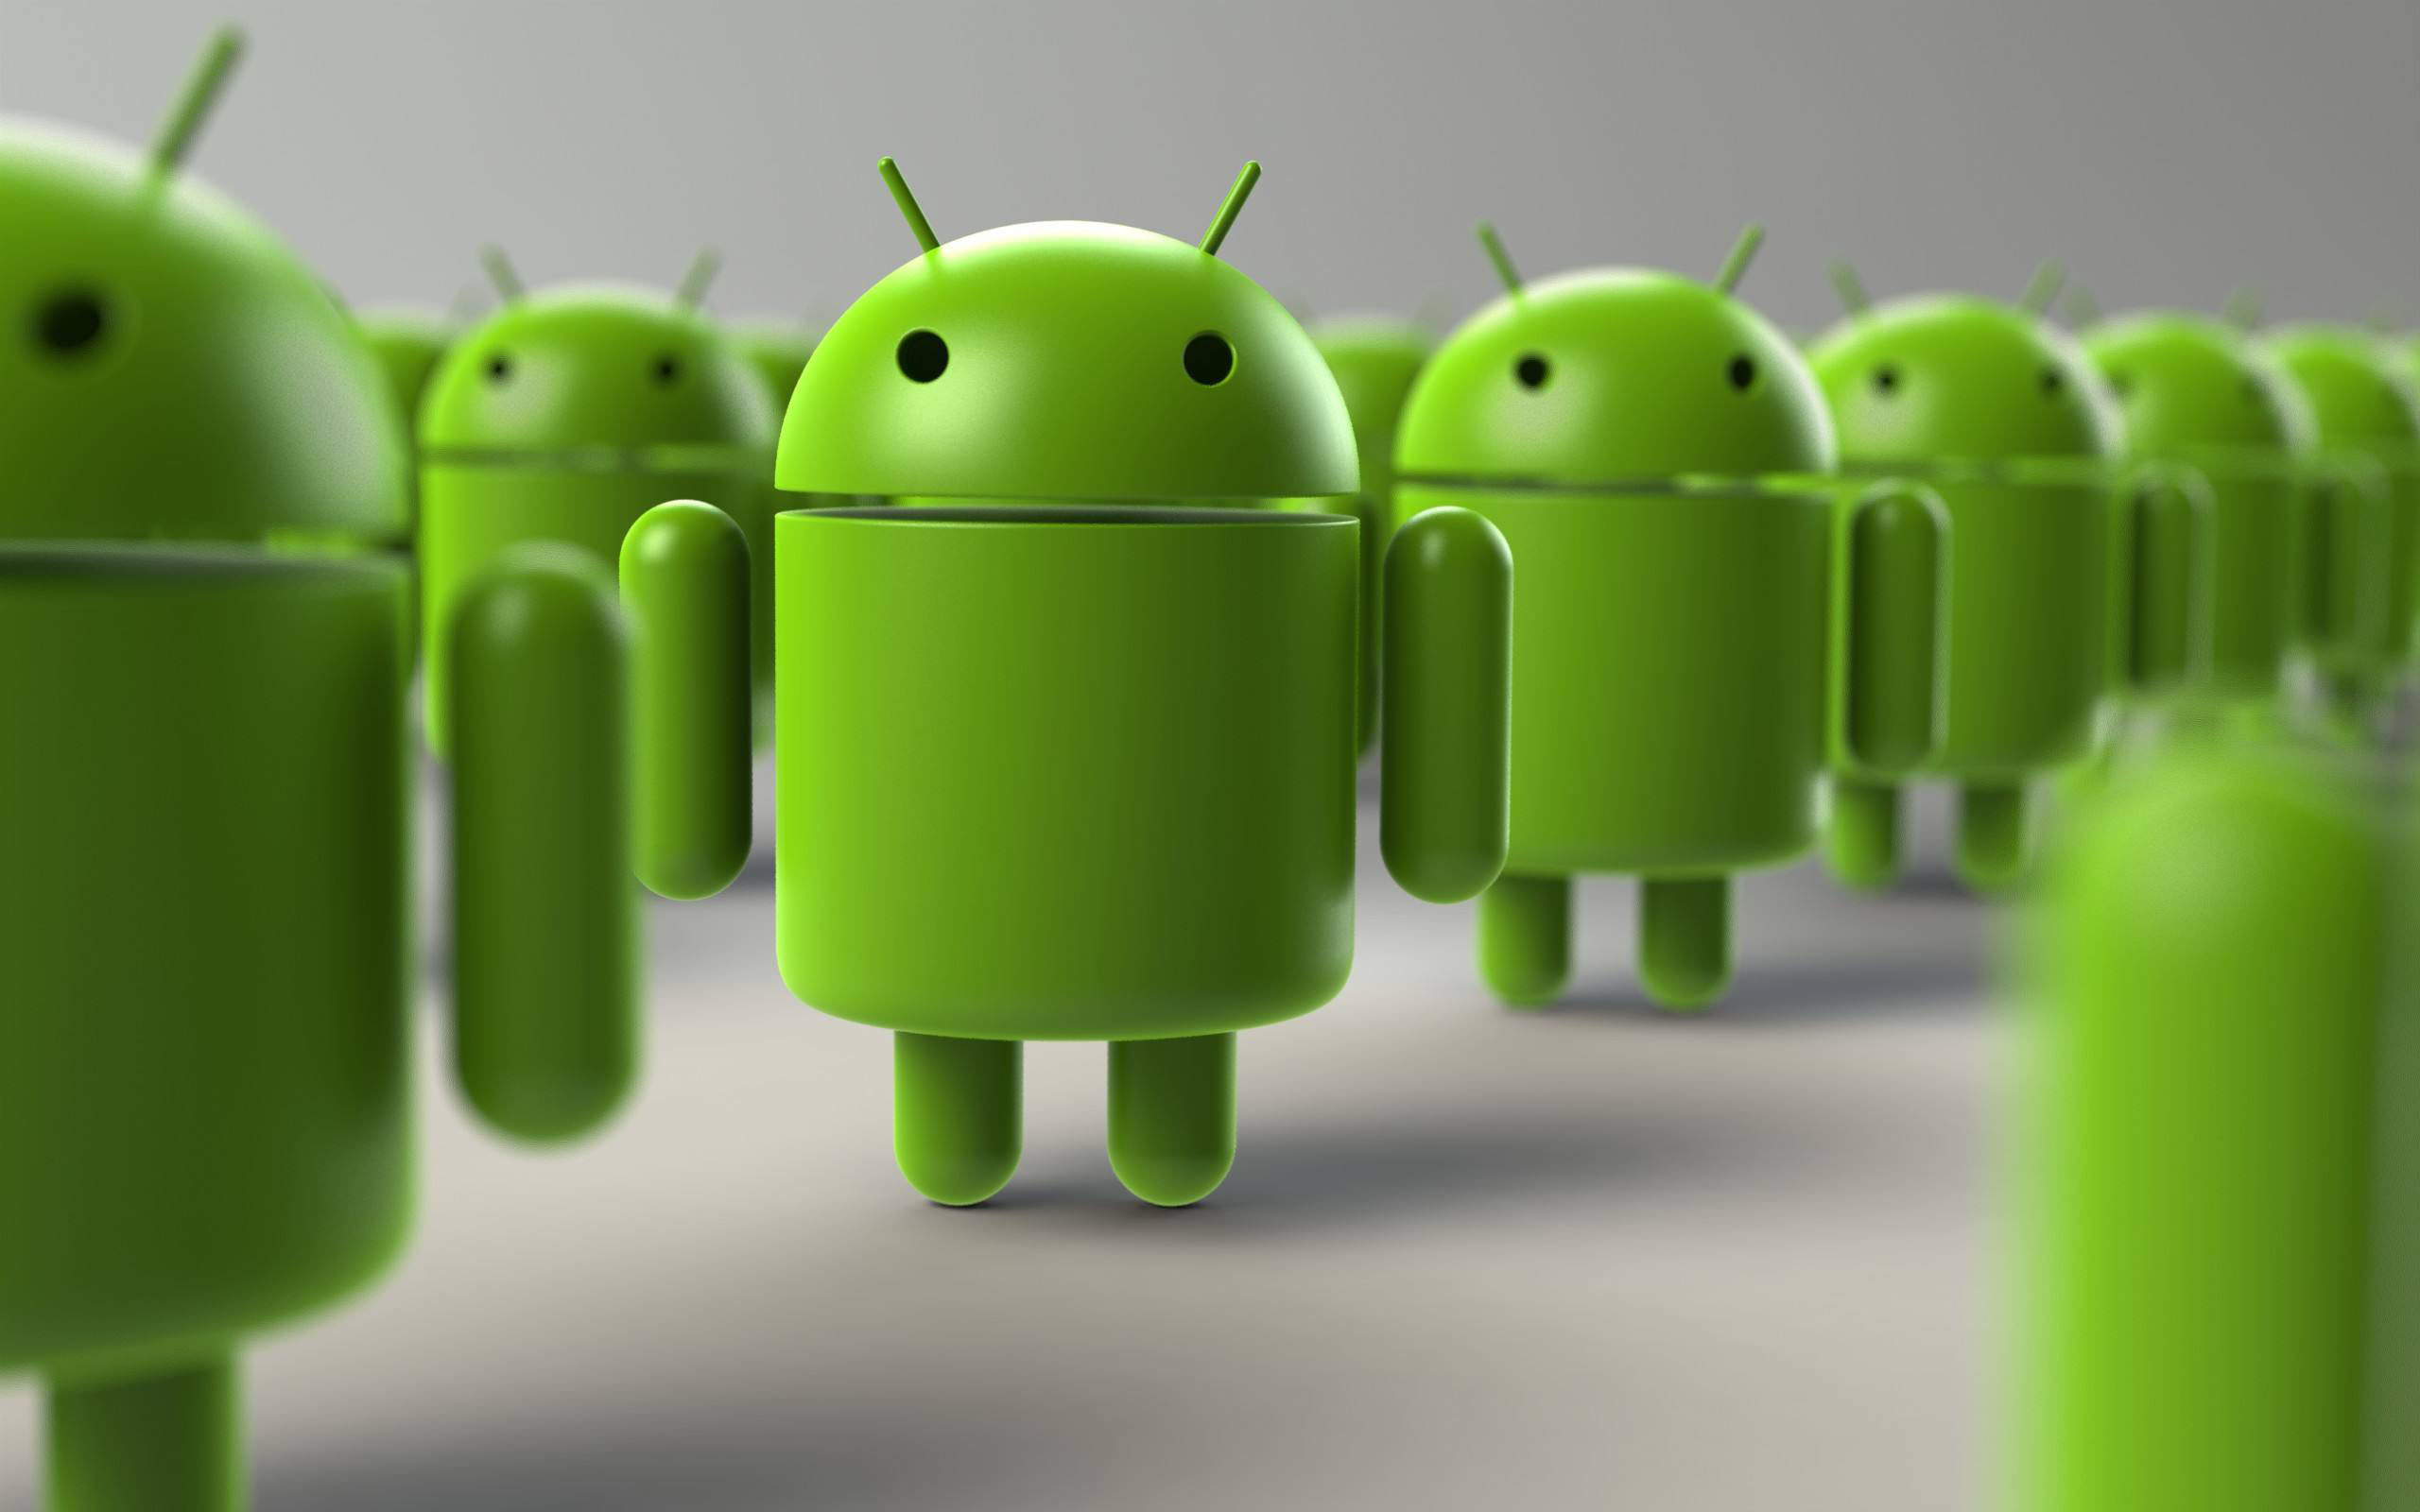 Android高级人才特训课程